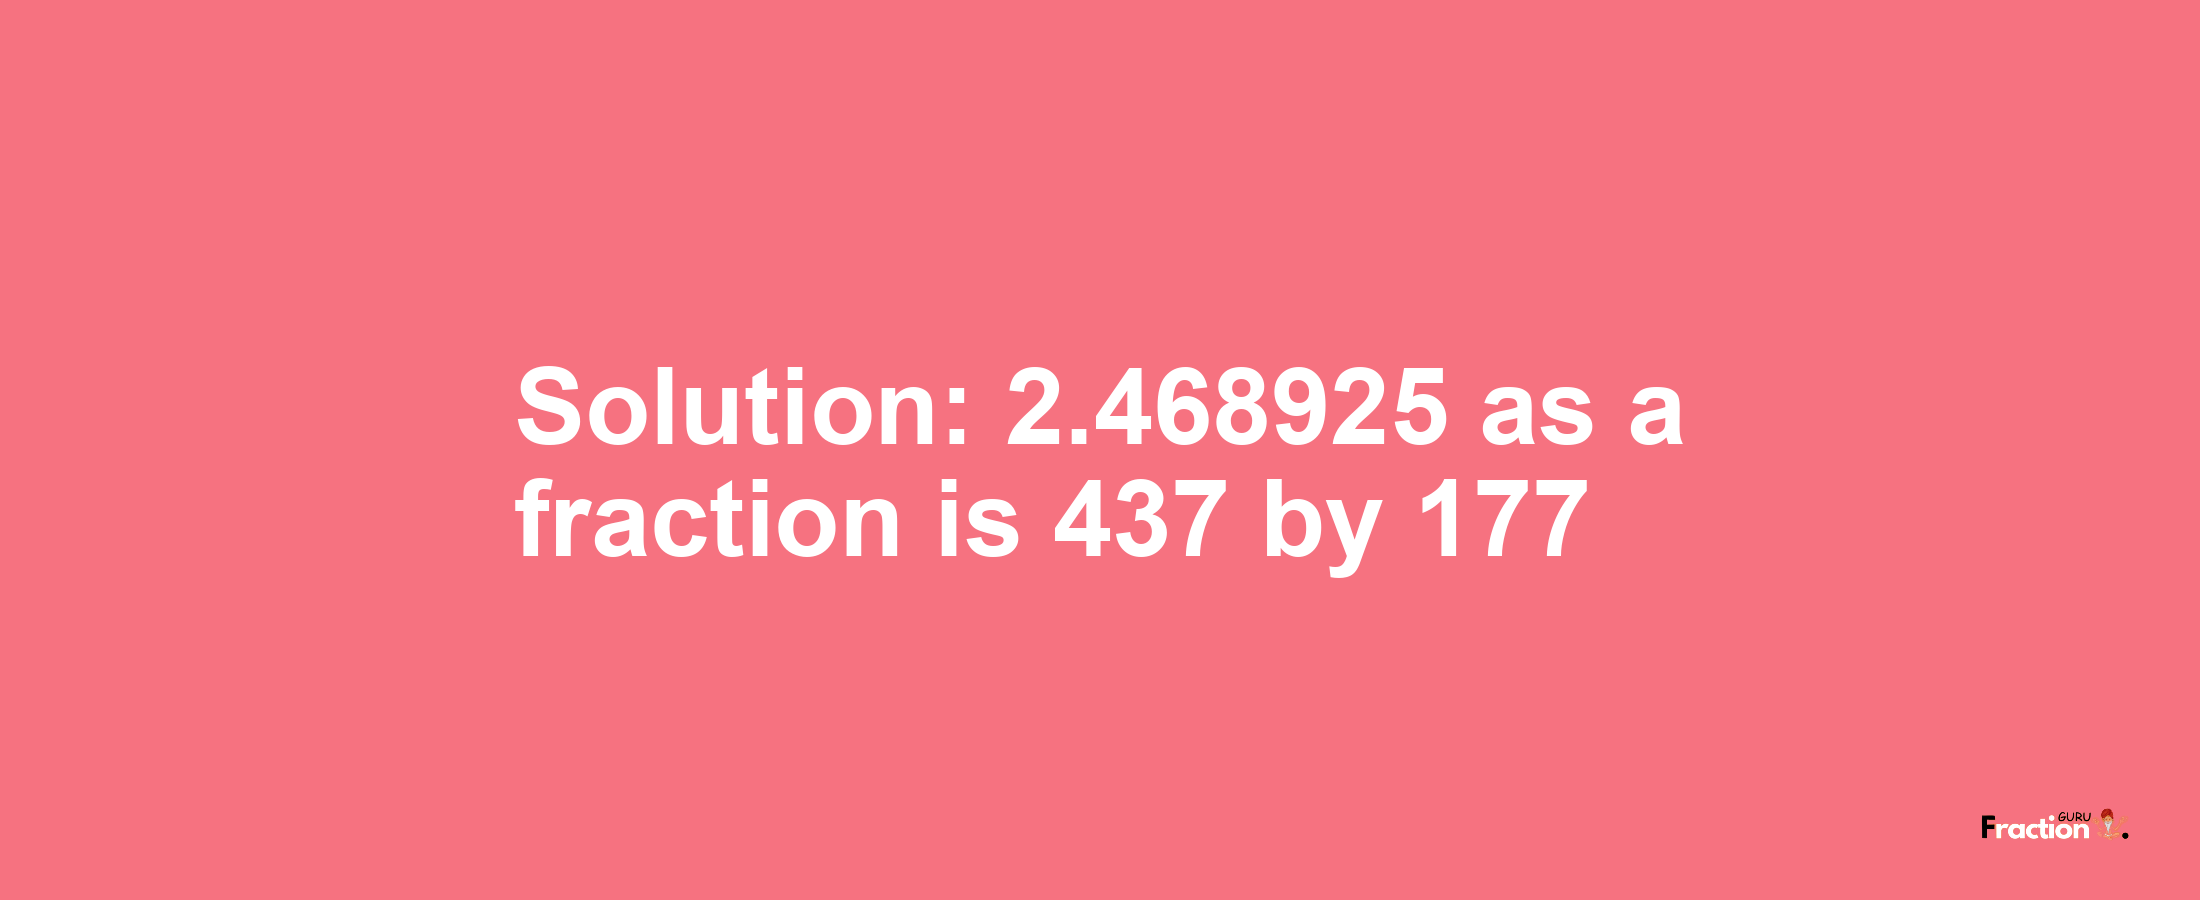 Solution:2.468925 as a fraction is 437/177